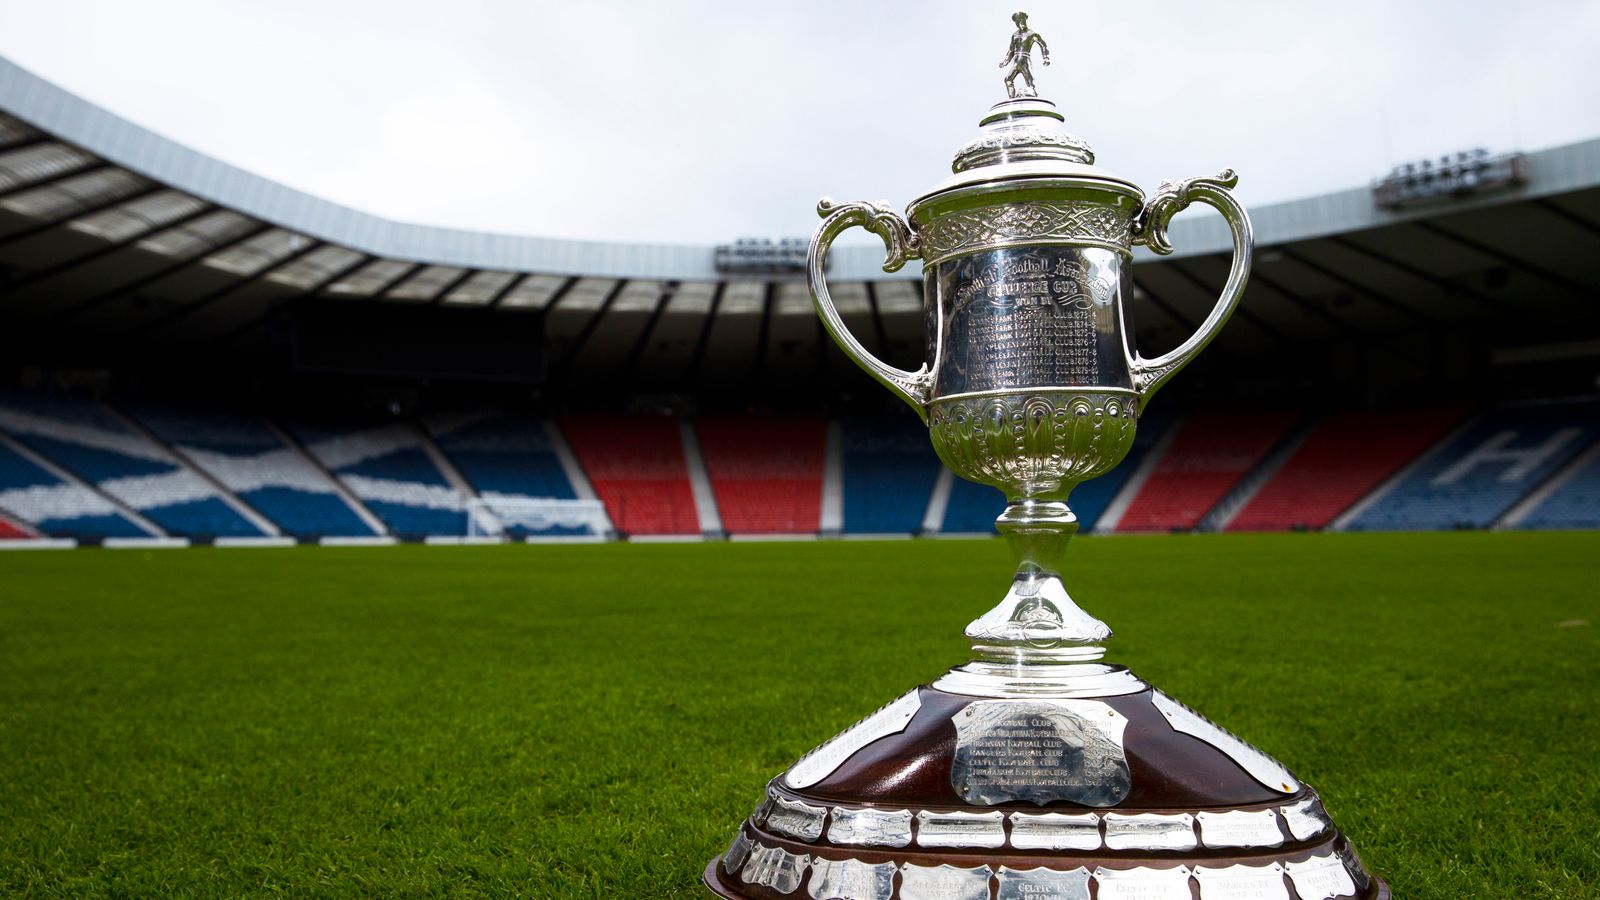 The Scottish Cup final will take place on 3 June